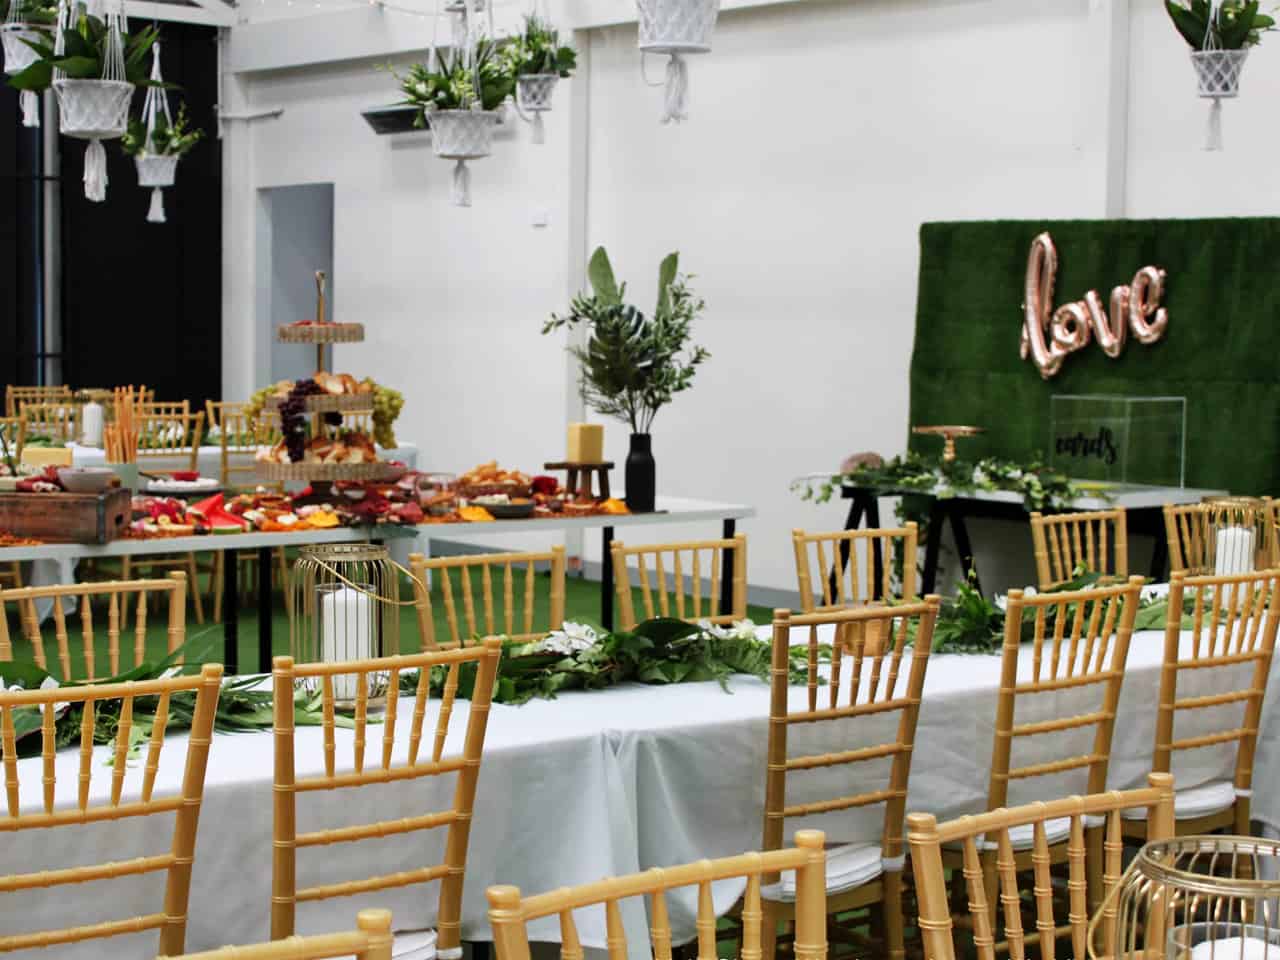 Long tables with wooden chairs